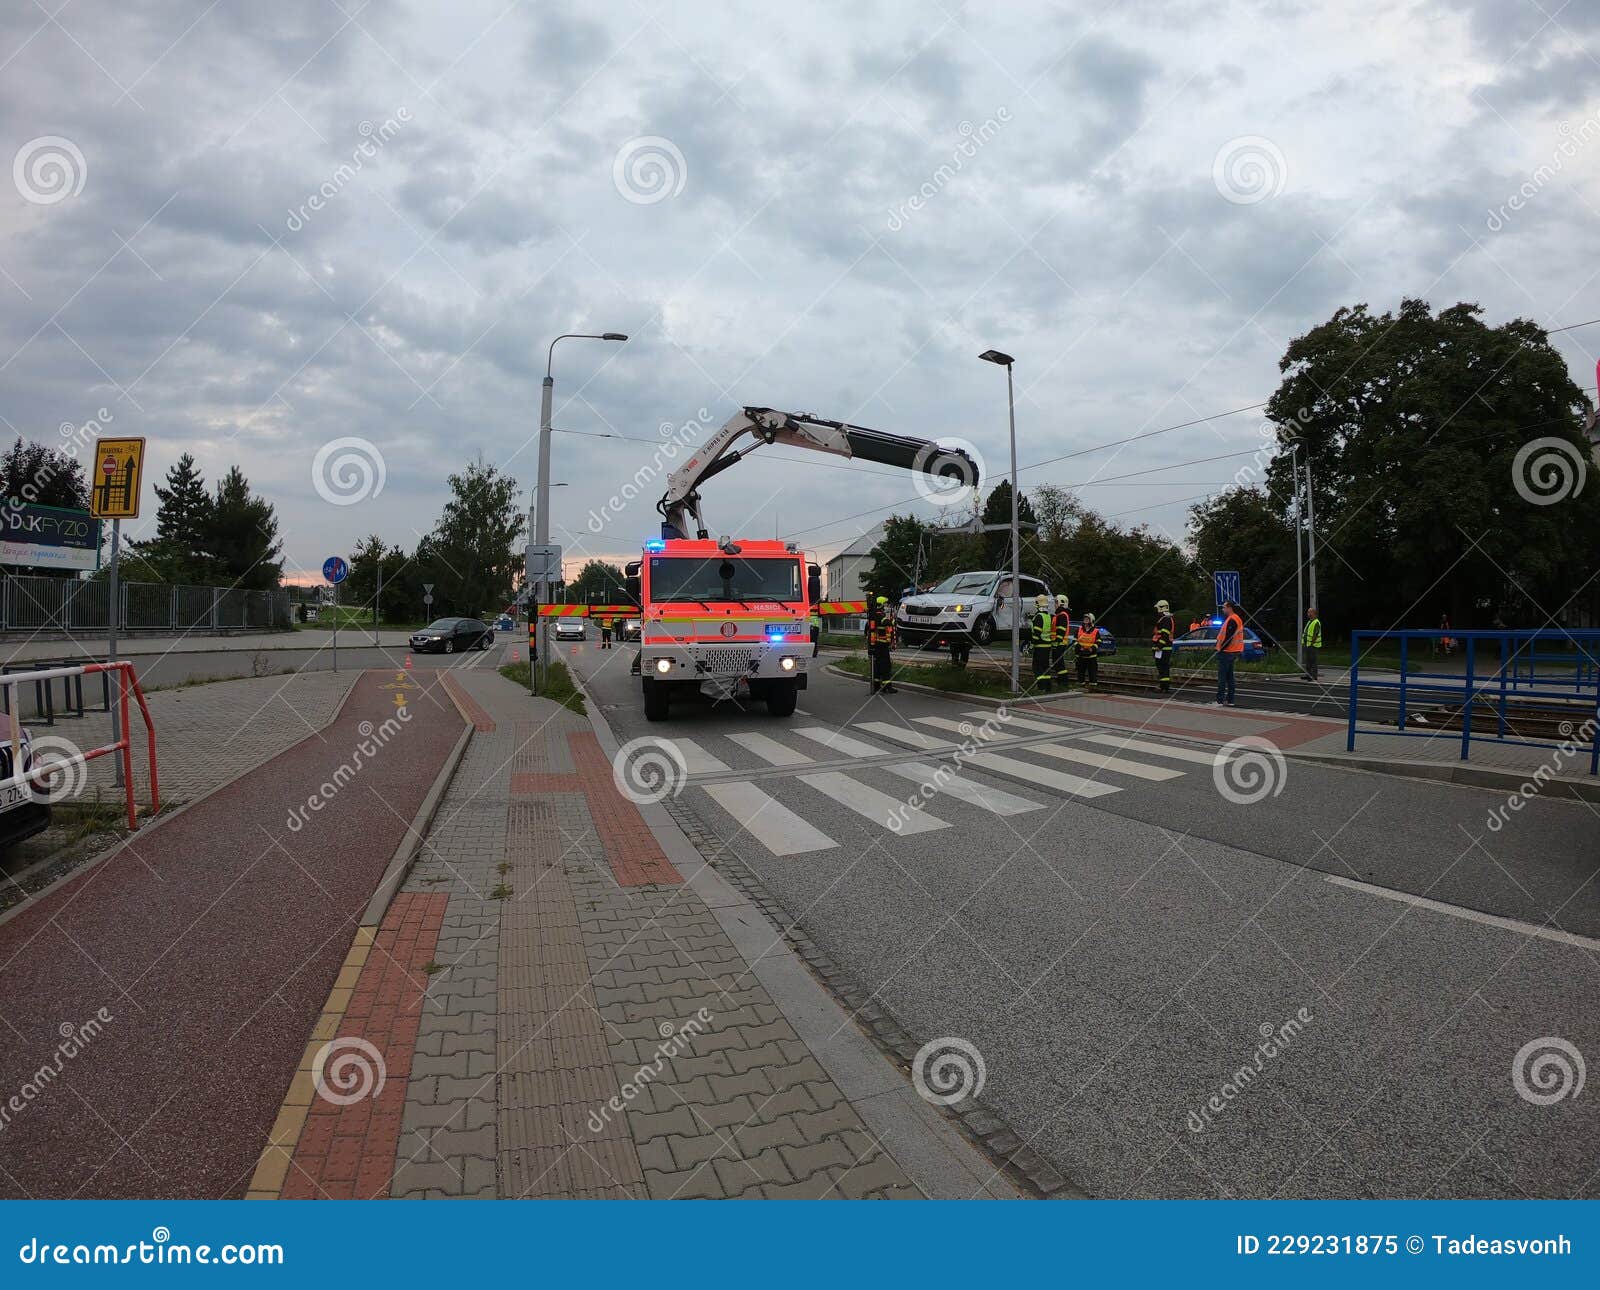 Car Accident September 7 2021 5 Editorial Image Image of fireman